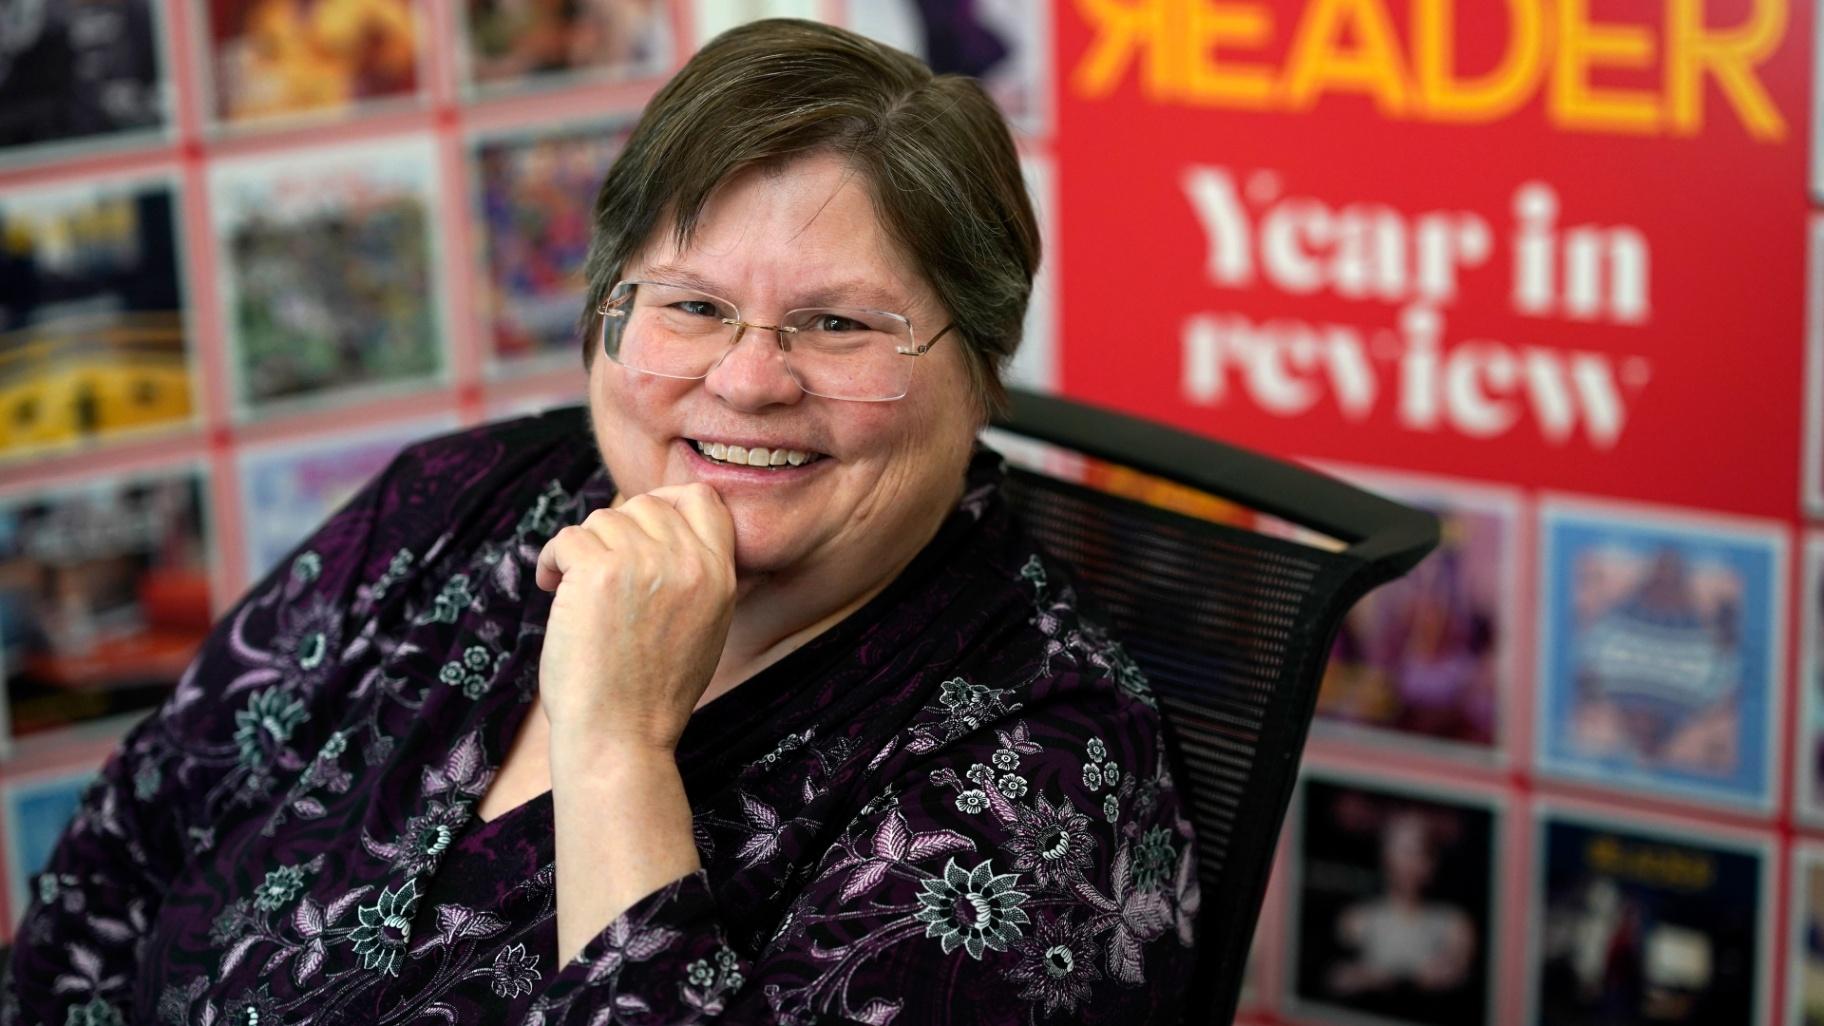 Tracy Baim, publisher of the Chicago Reader weekly newspaper sits for a portrait in her office Monday, May 9, 2022, in Chicago. (AP Photo / Charles Rex Arbogast)